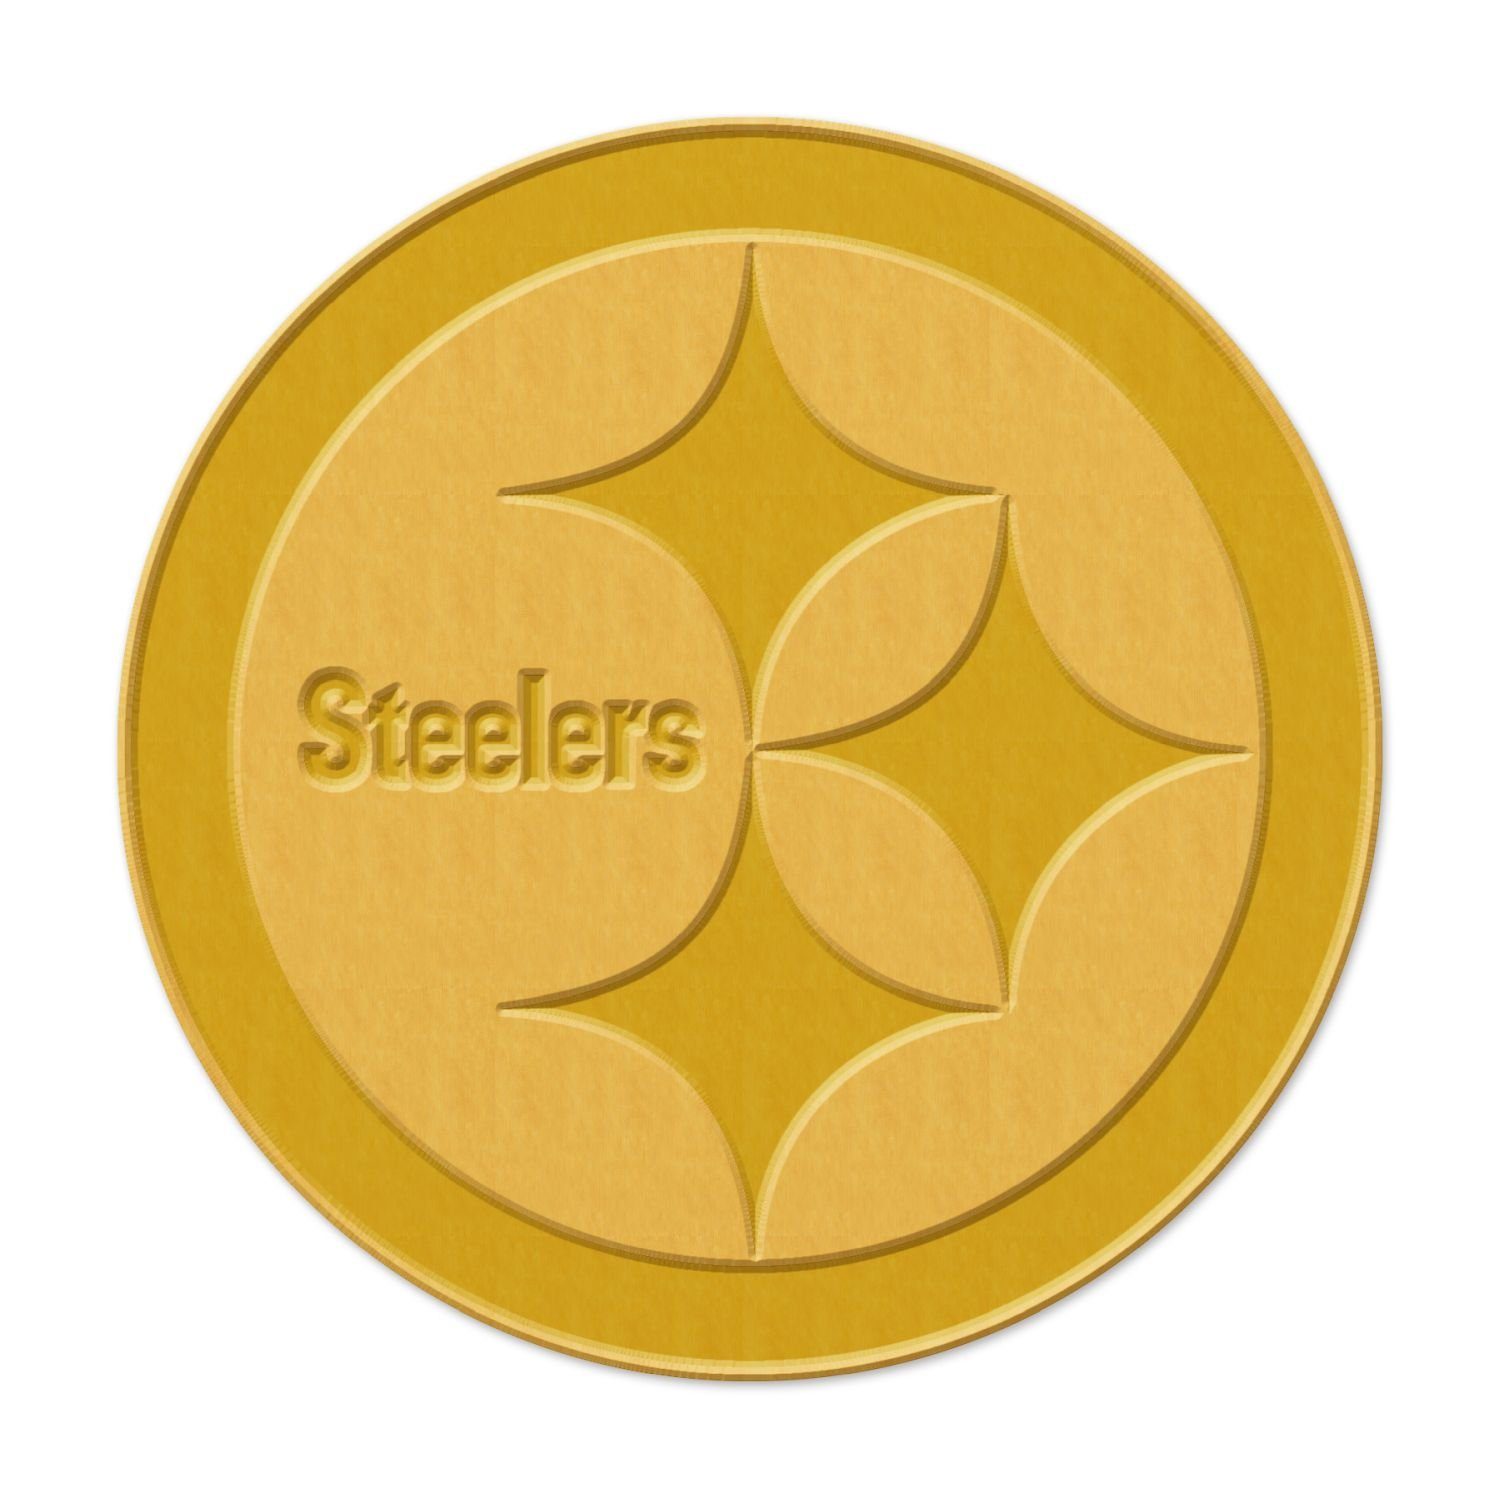 WinCraft Pins Universal Schmuck Steelers GOLD PIN Pittsburgh Teams NFL Caps